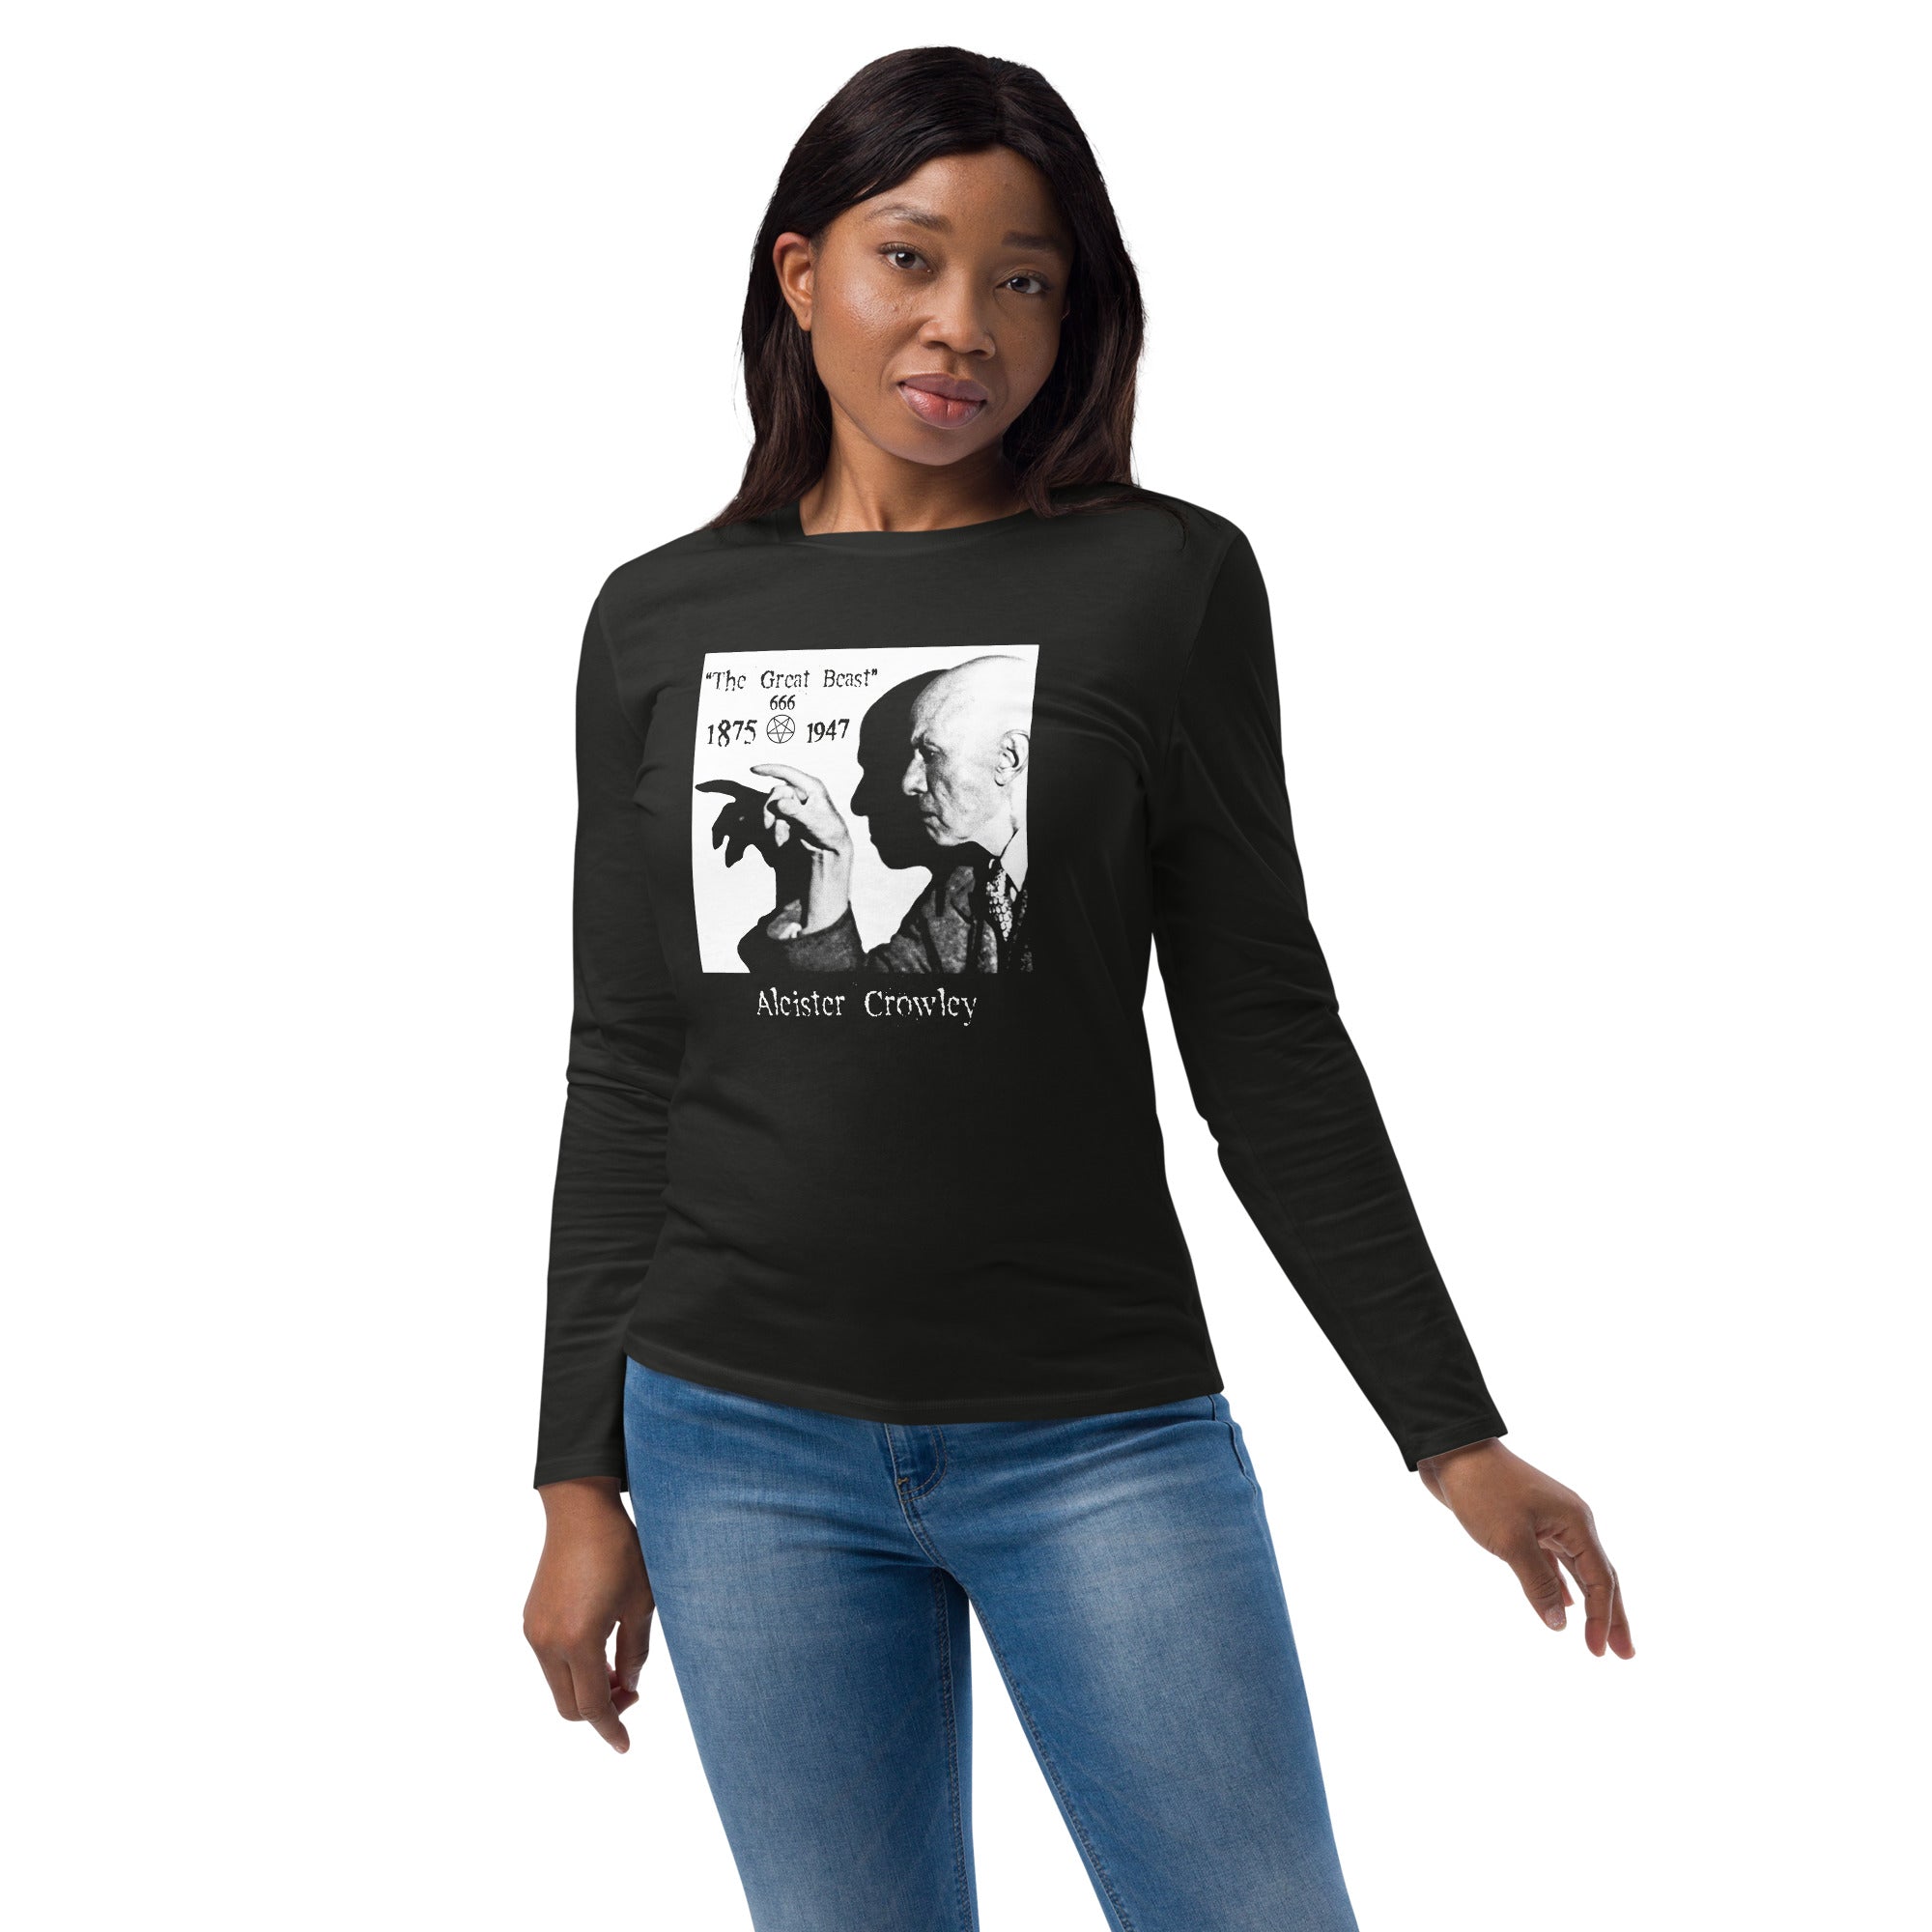 Aleister Crowley Infamous Occult Leader of Thelema Sex Magic Fashion Long Sleeve Shirt - Edge of Life Designs